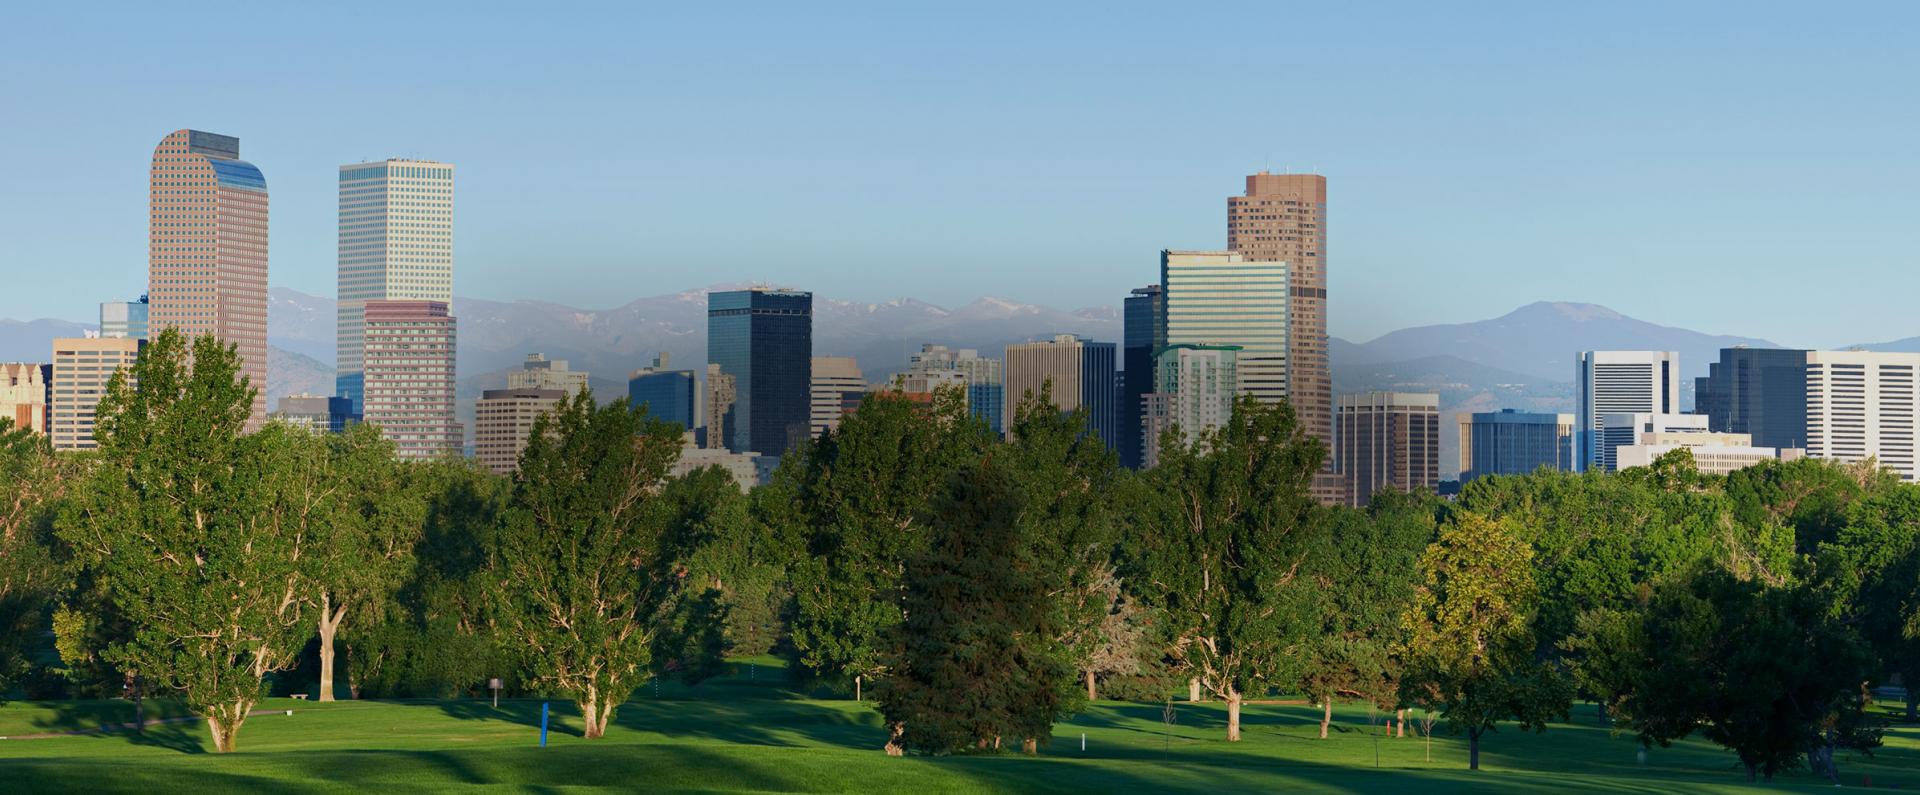 skyline of Denver behind a green park with mountains in the background